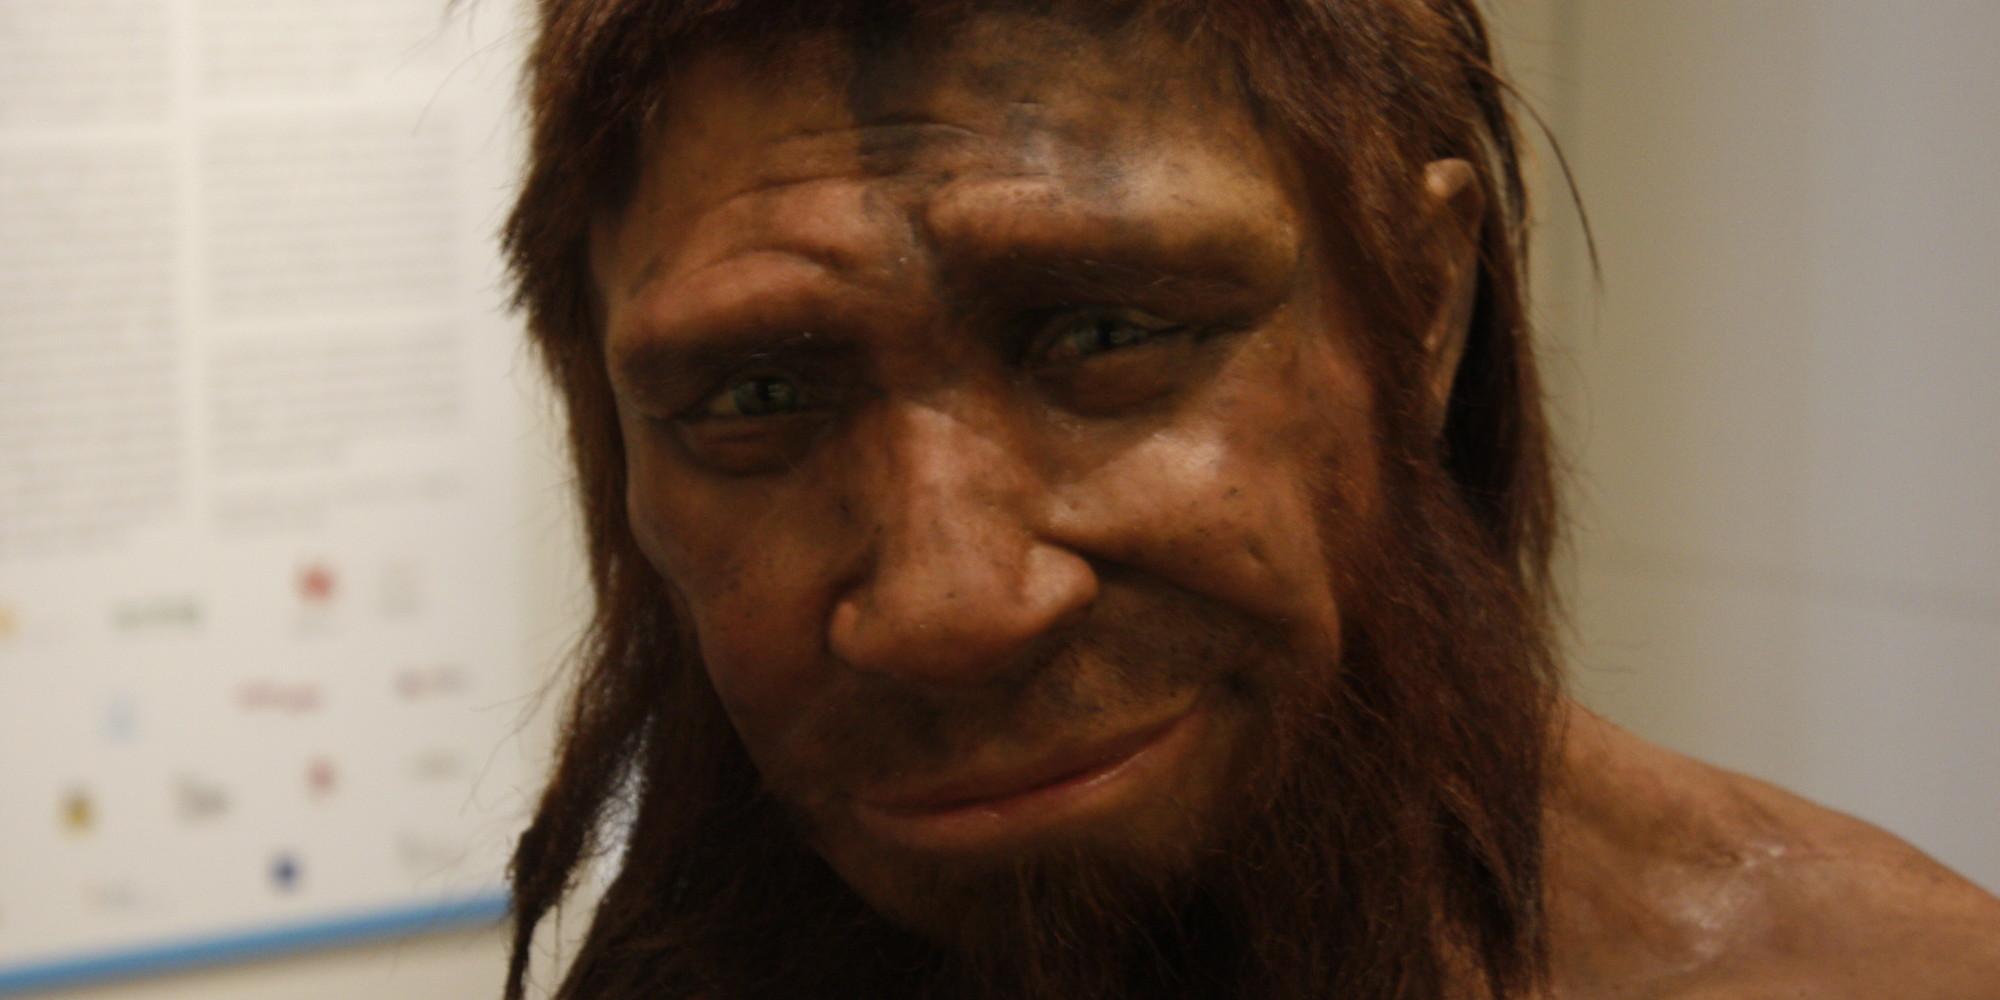 Ancient genes from Neanderthals can lead to slow drug metabolism